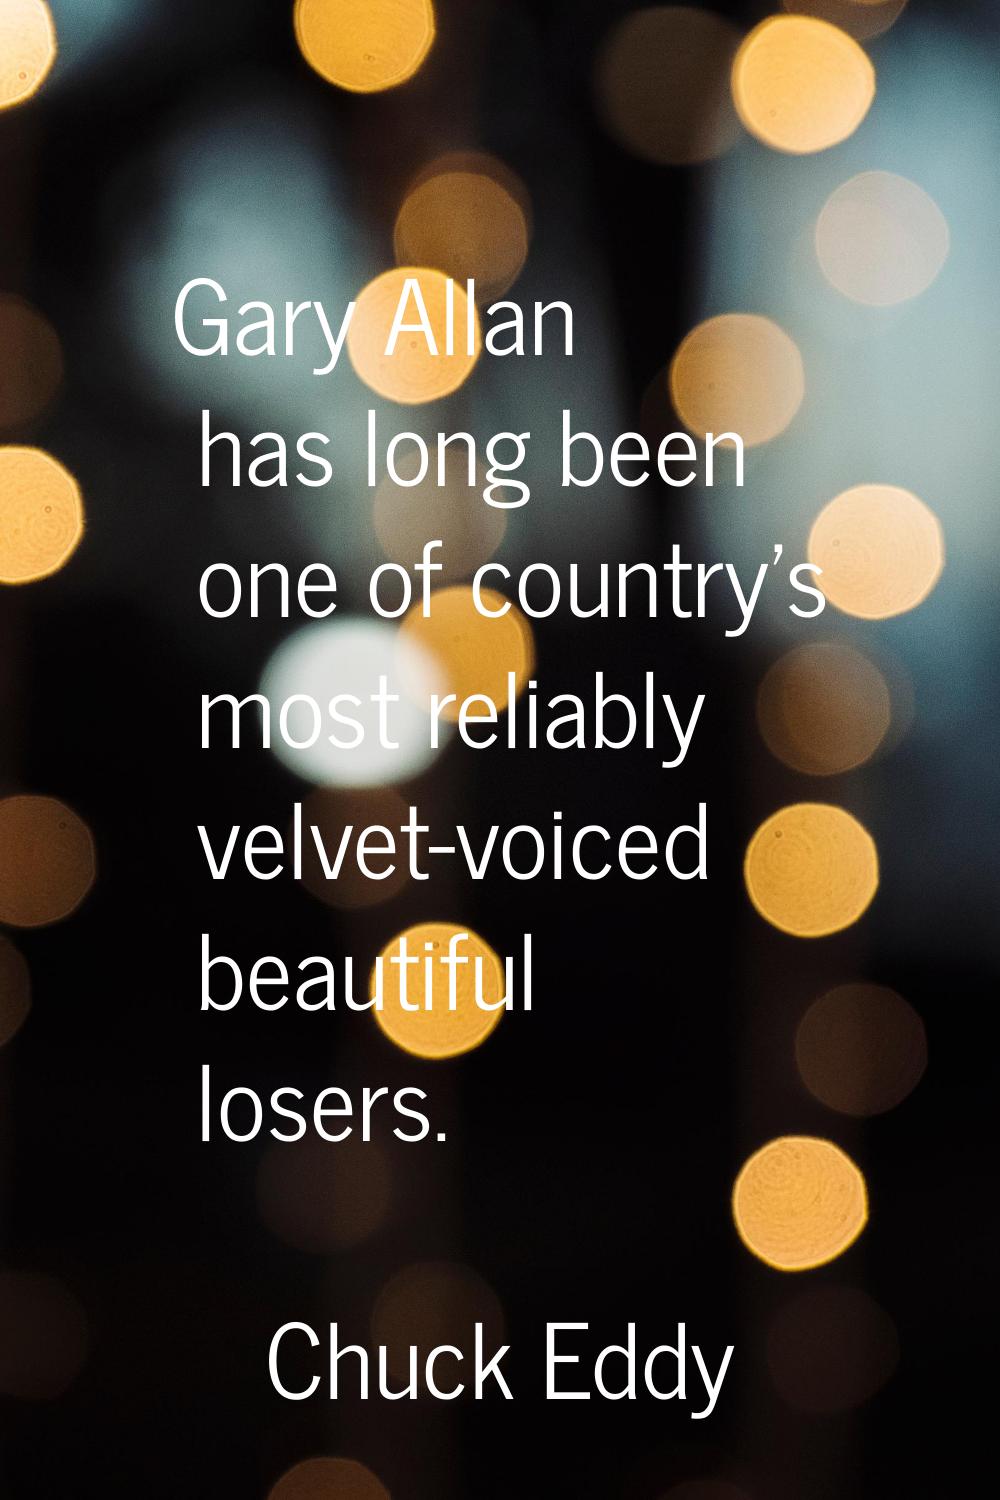 Gary Allan has long been one of country's most reliably velvet-voiced beautiful losers.